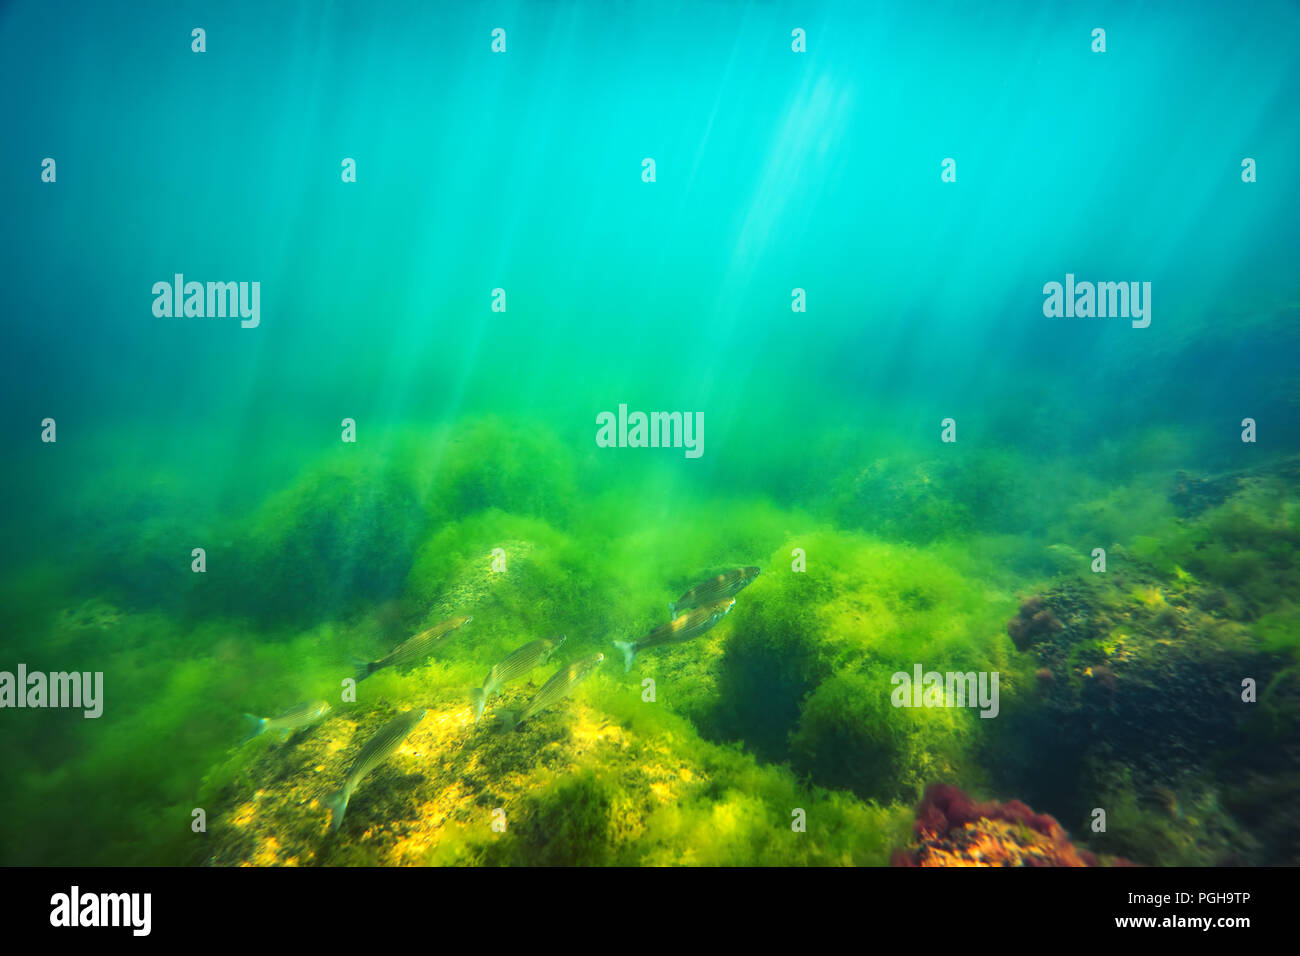 Underwater image of small fishes swimming in the sea Stock Photo